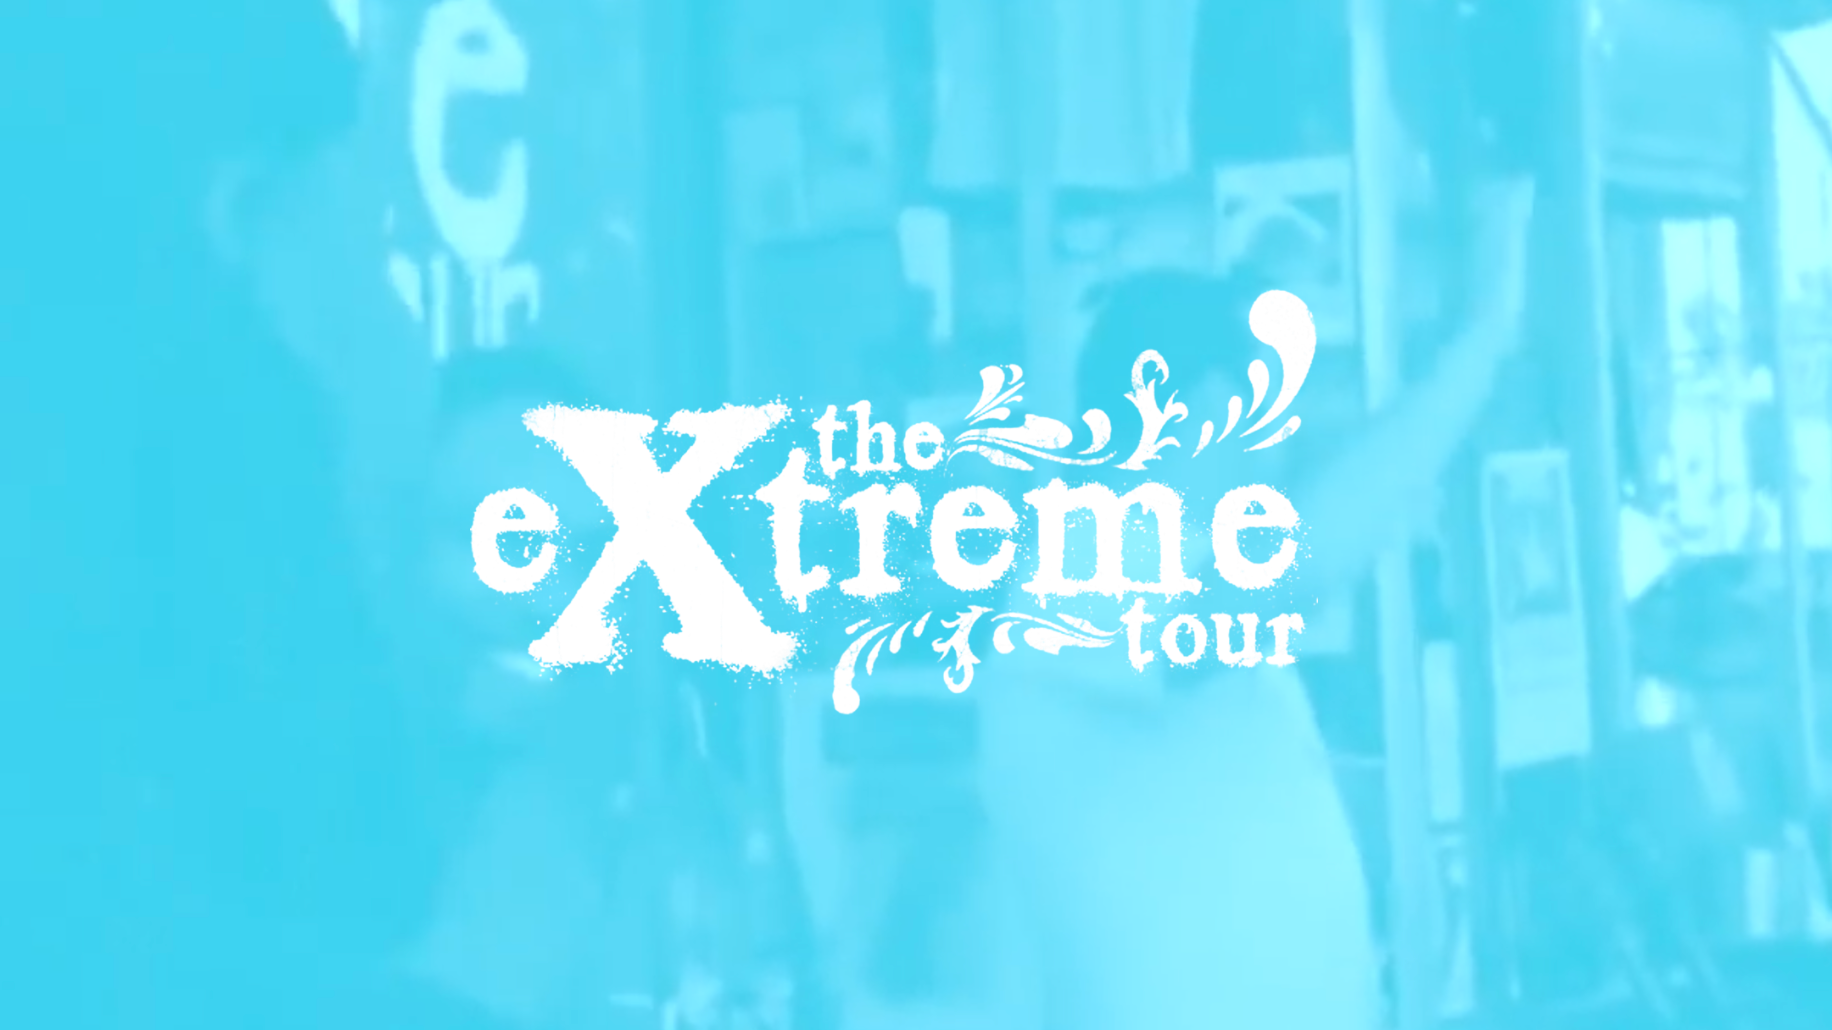 The Extreme Tour SponsorMyEvent